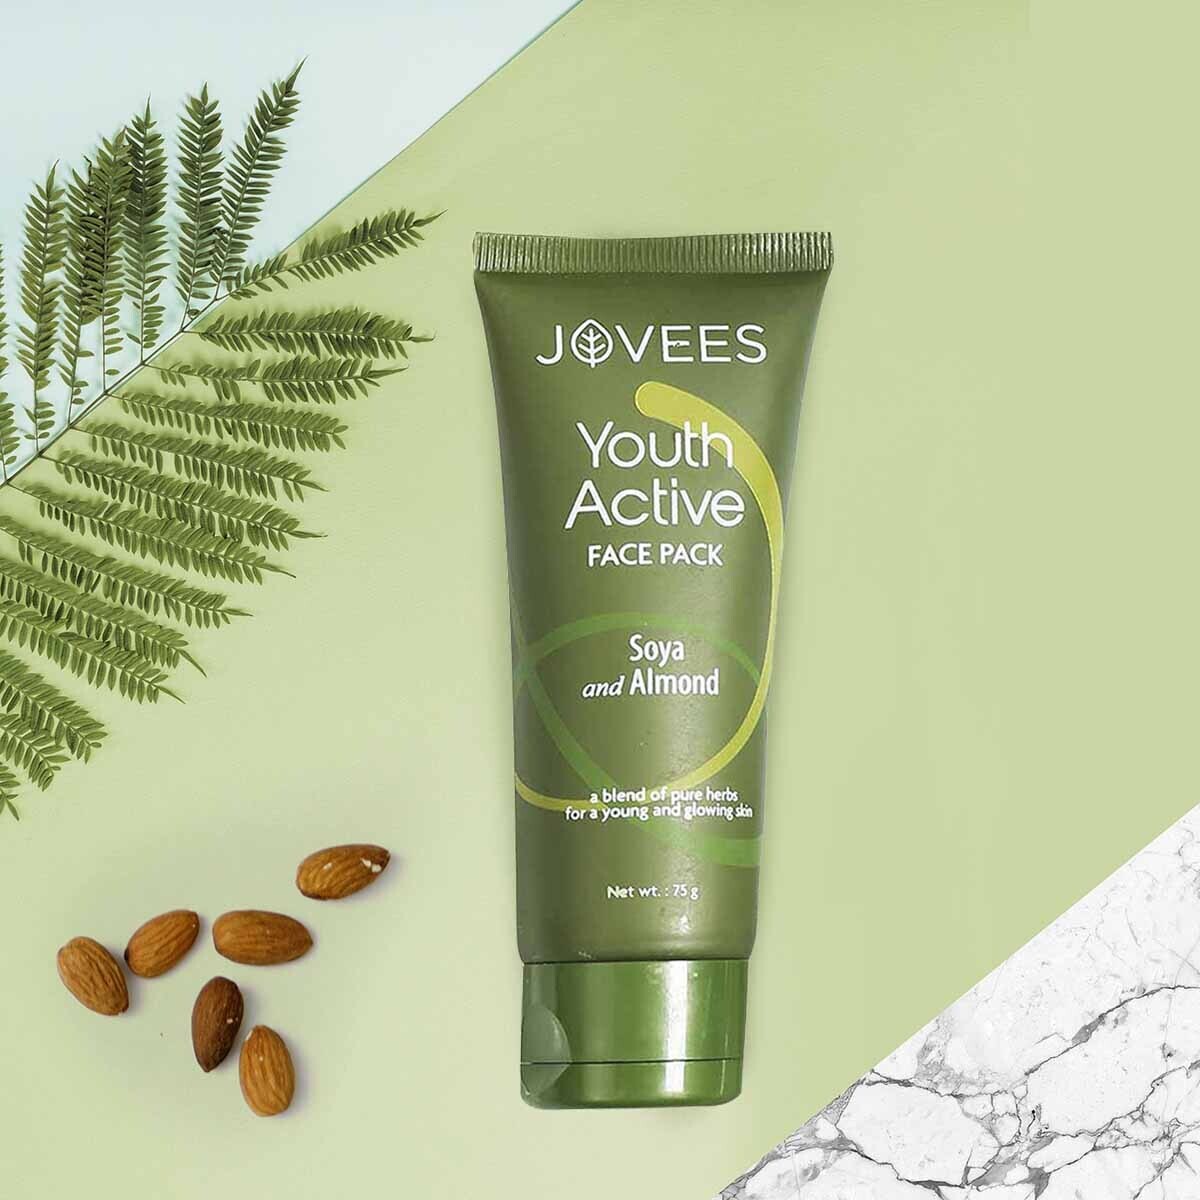 JOVEES YOUTH ACTIVE FACE PACK